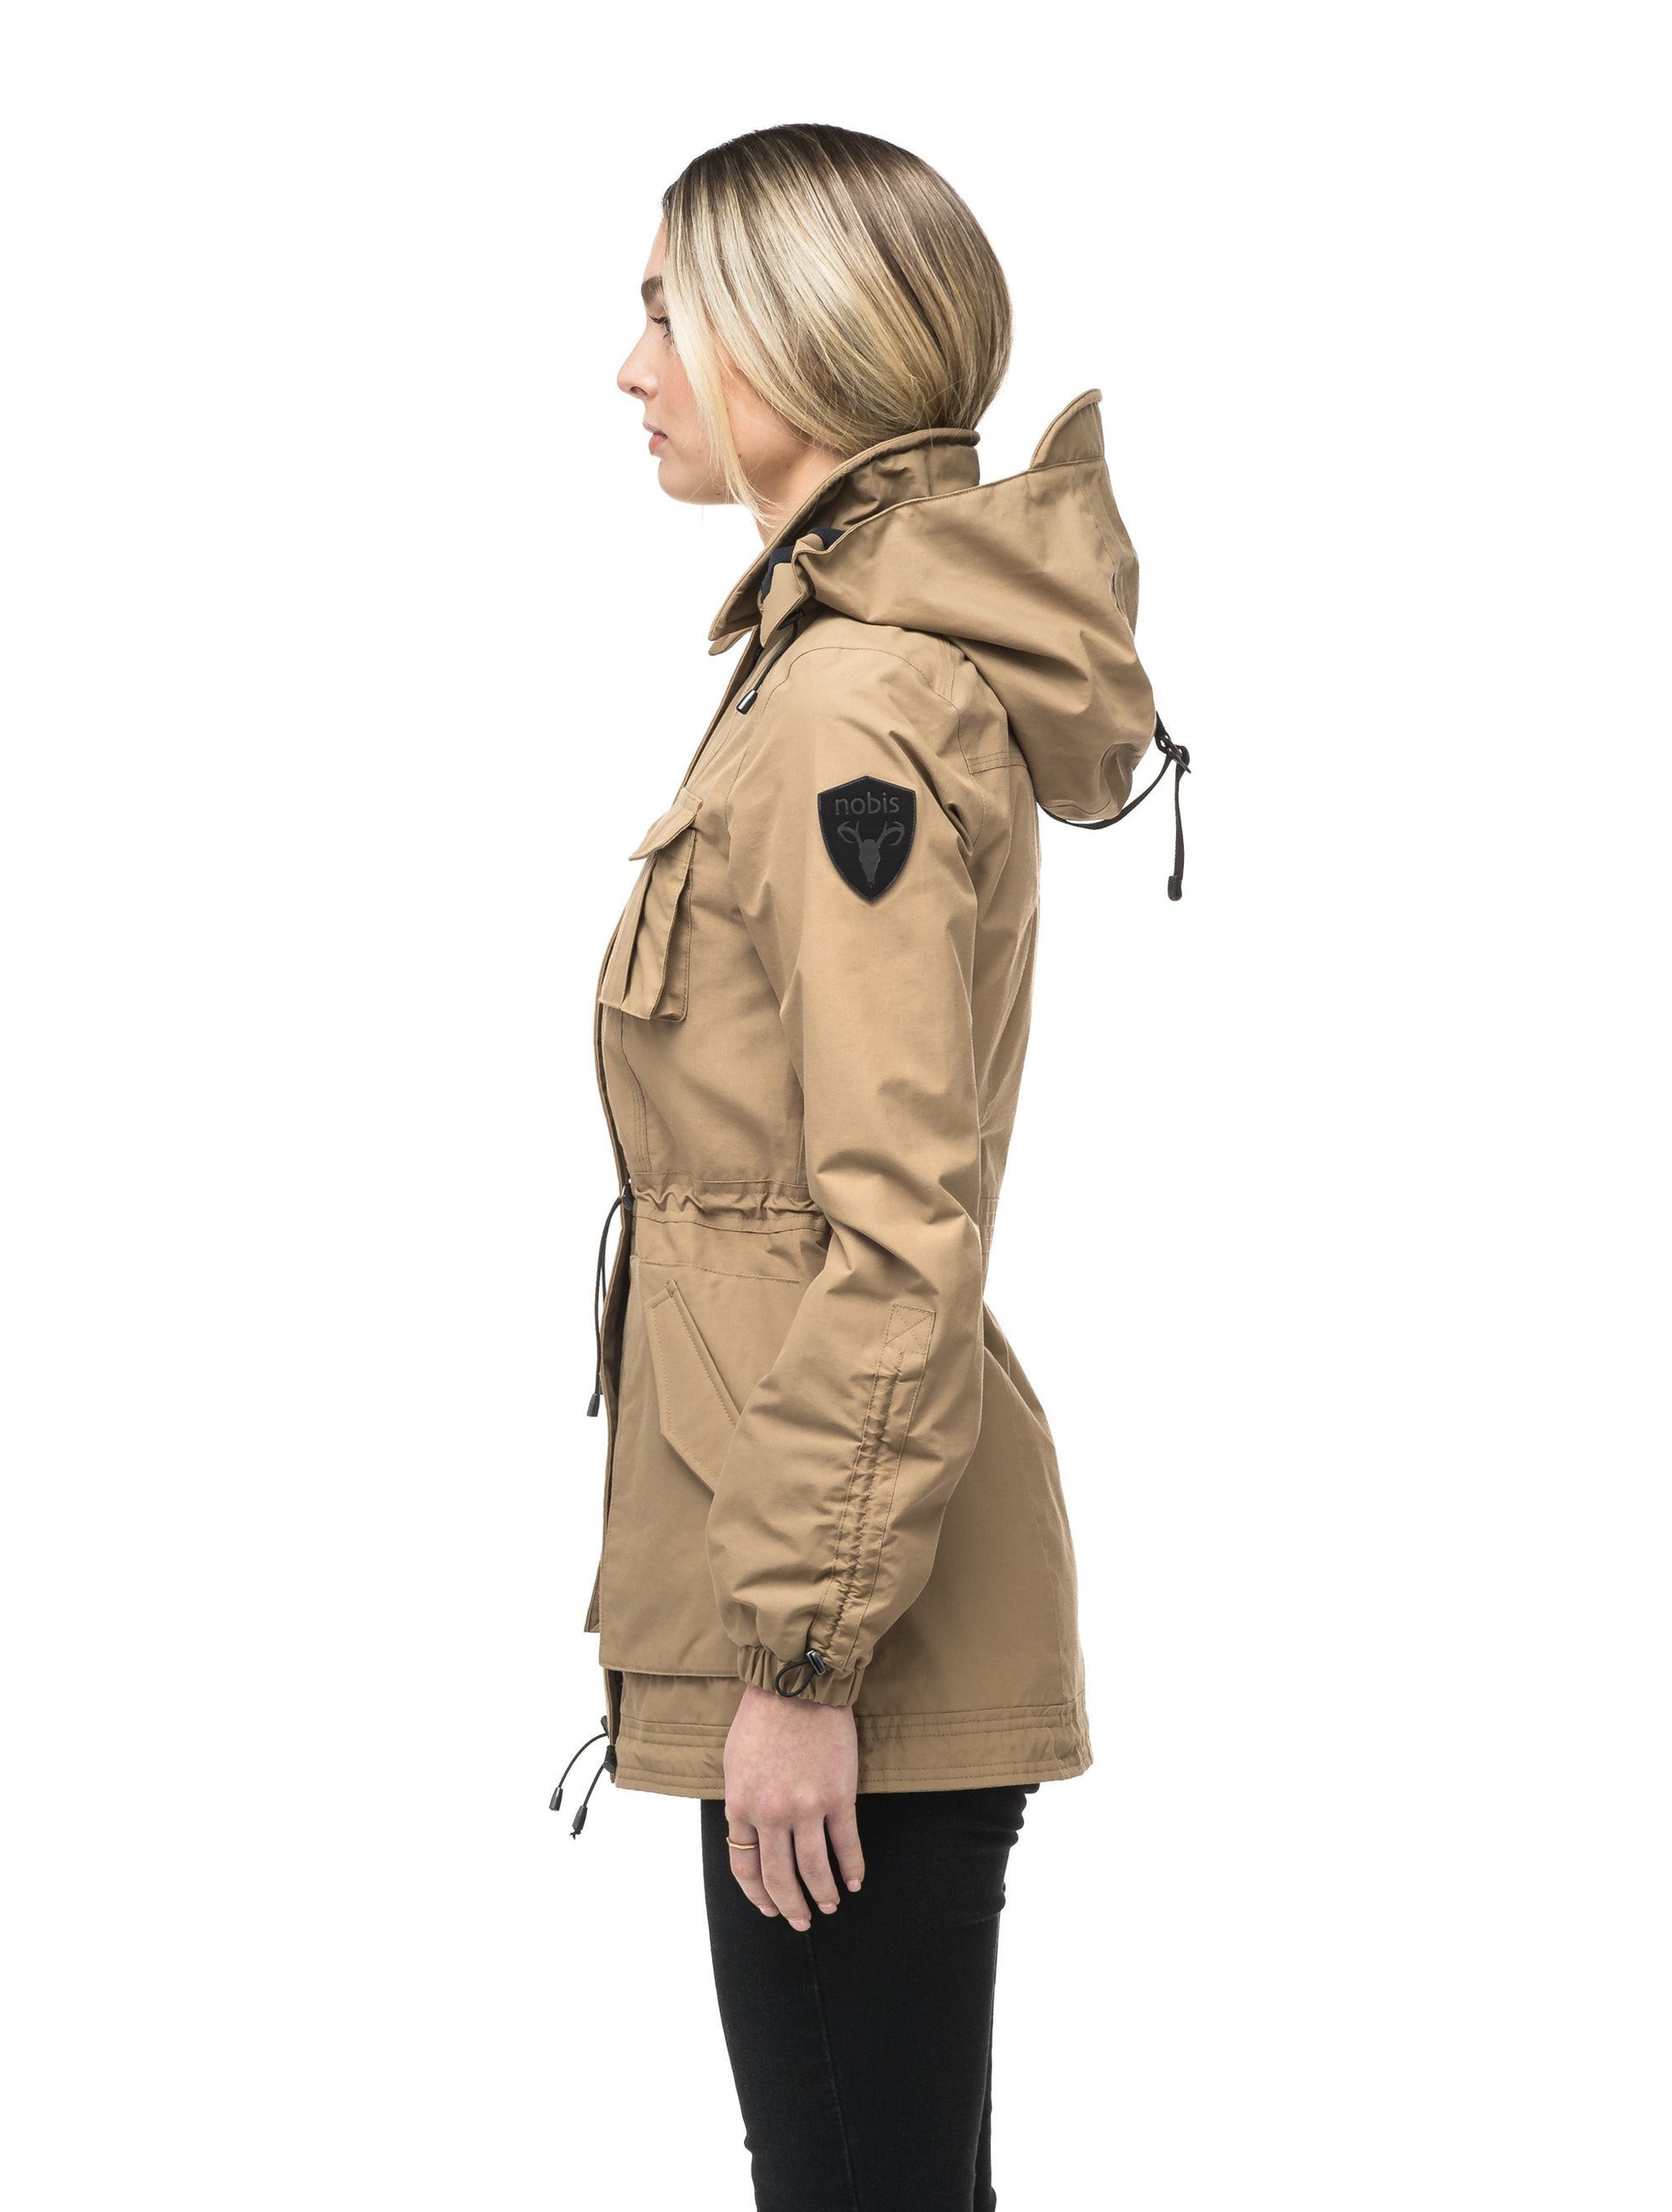 Women's hooded shirt jacket with four front pockets and adjustable waist in Tan